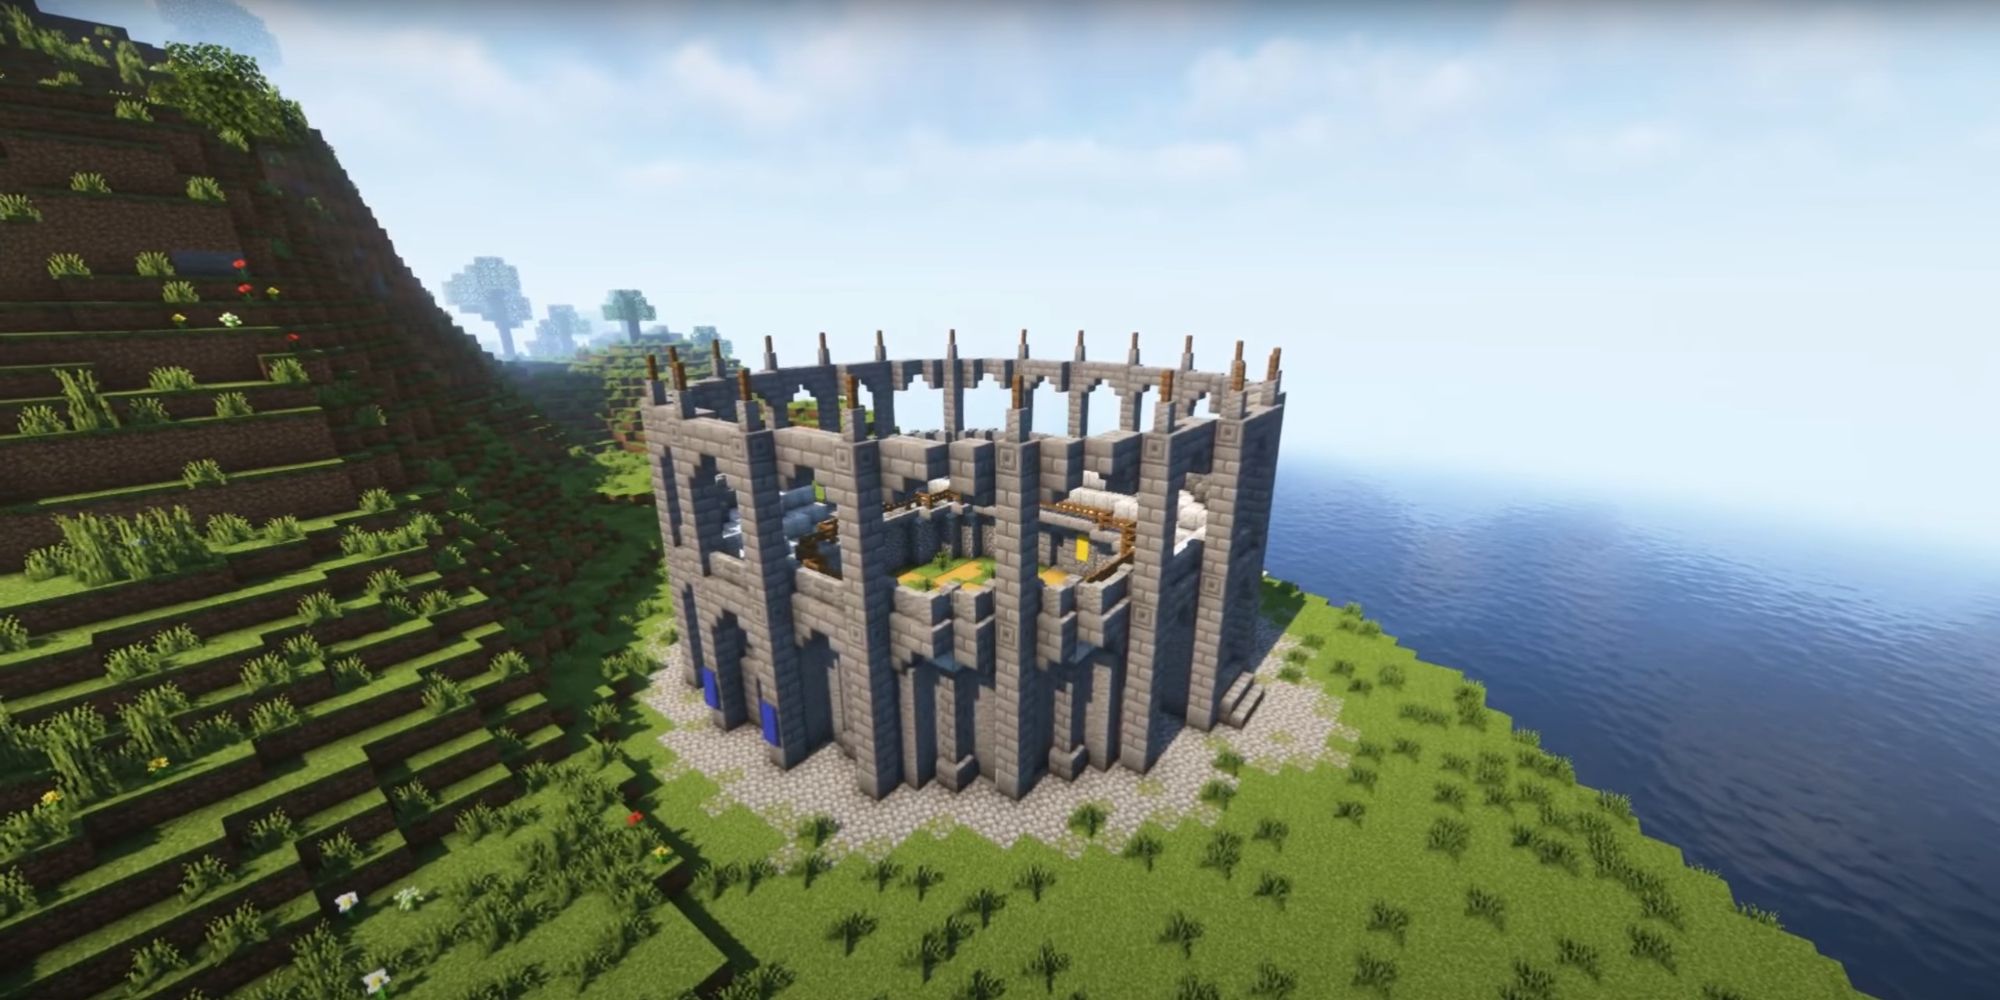 An image from Minecraft of a small arena on the side of a cliff, overlooking the ocean.